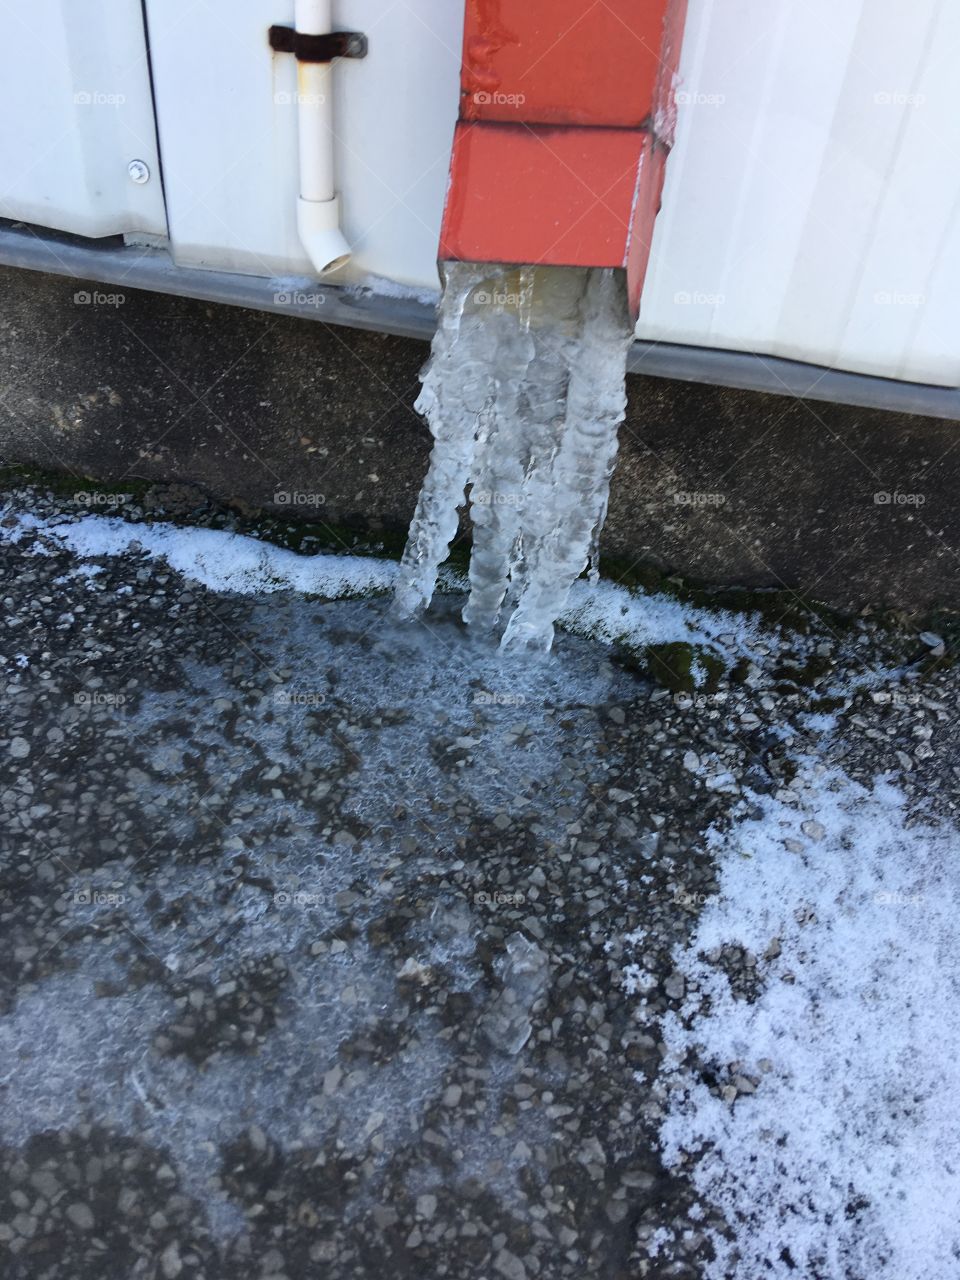 BRR! Got a little cold last night look at this water froze coming out of the pipe.